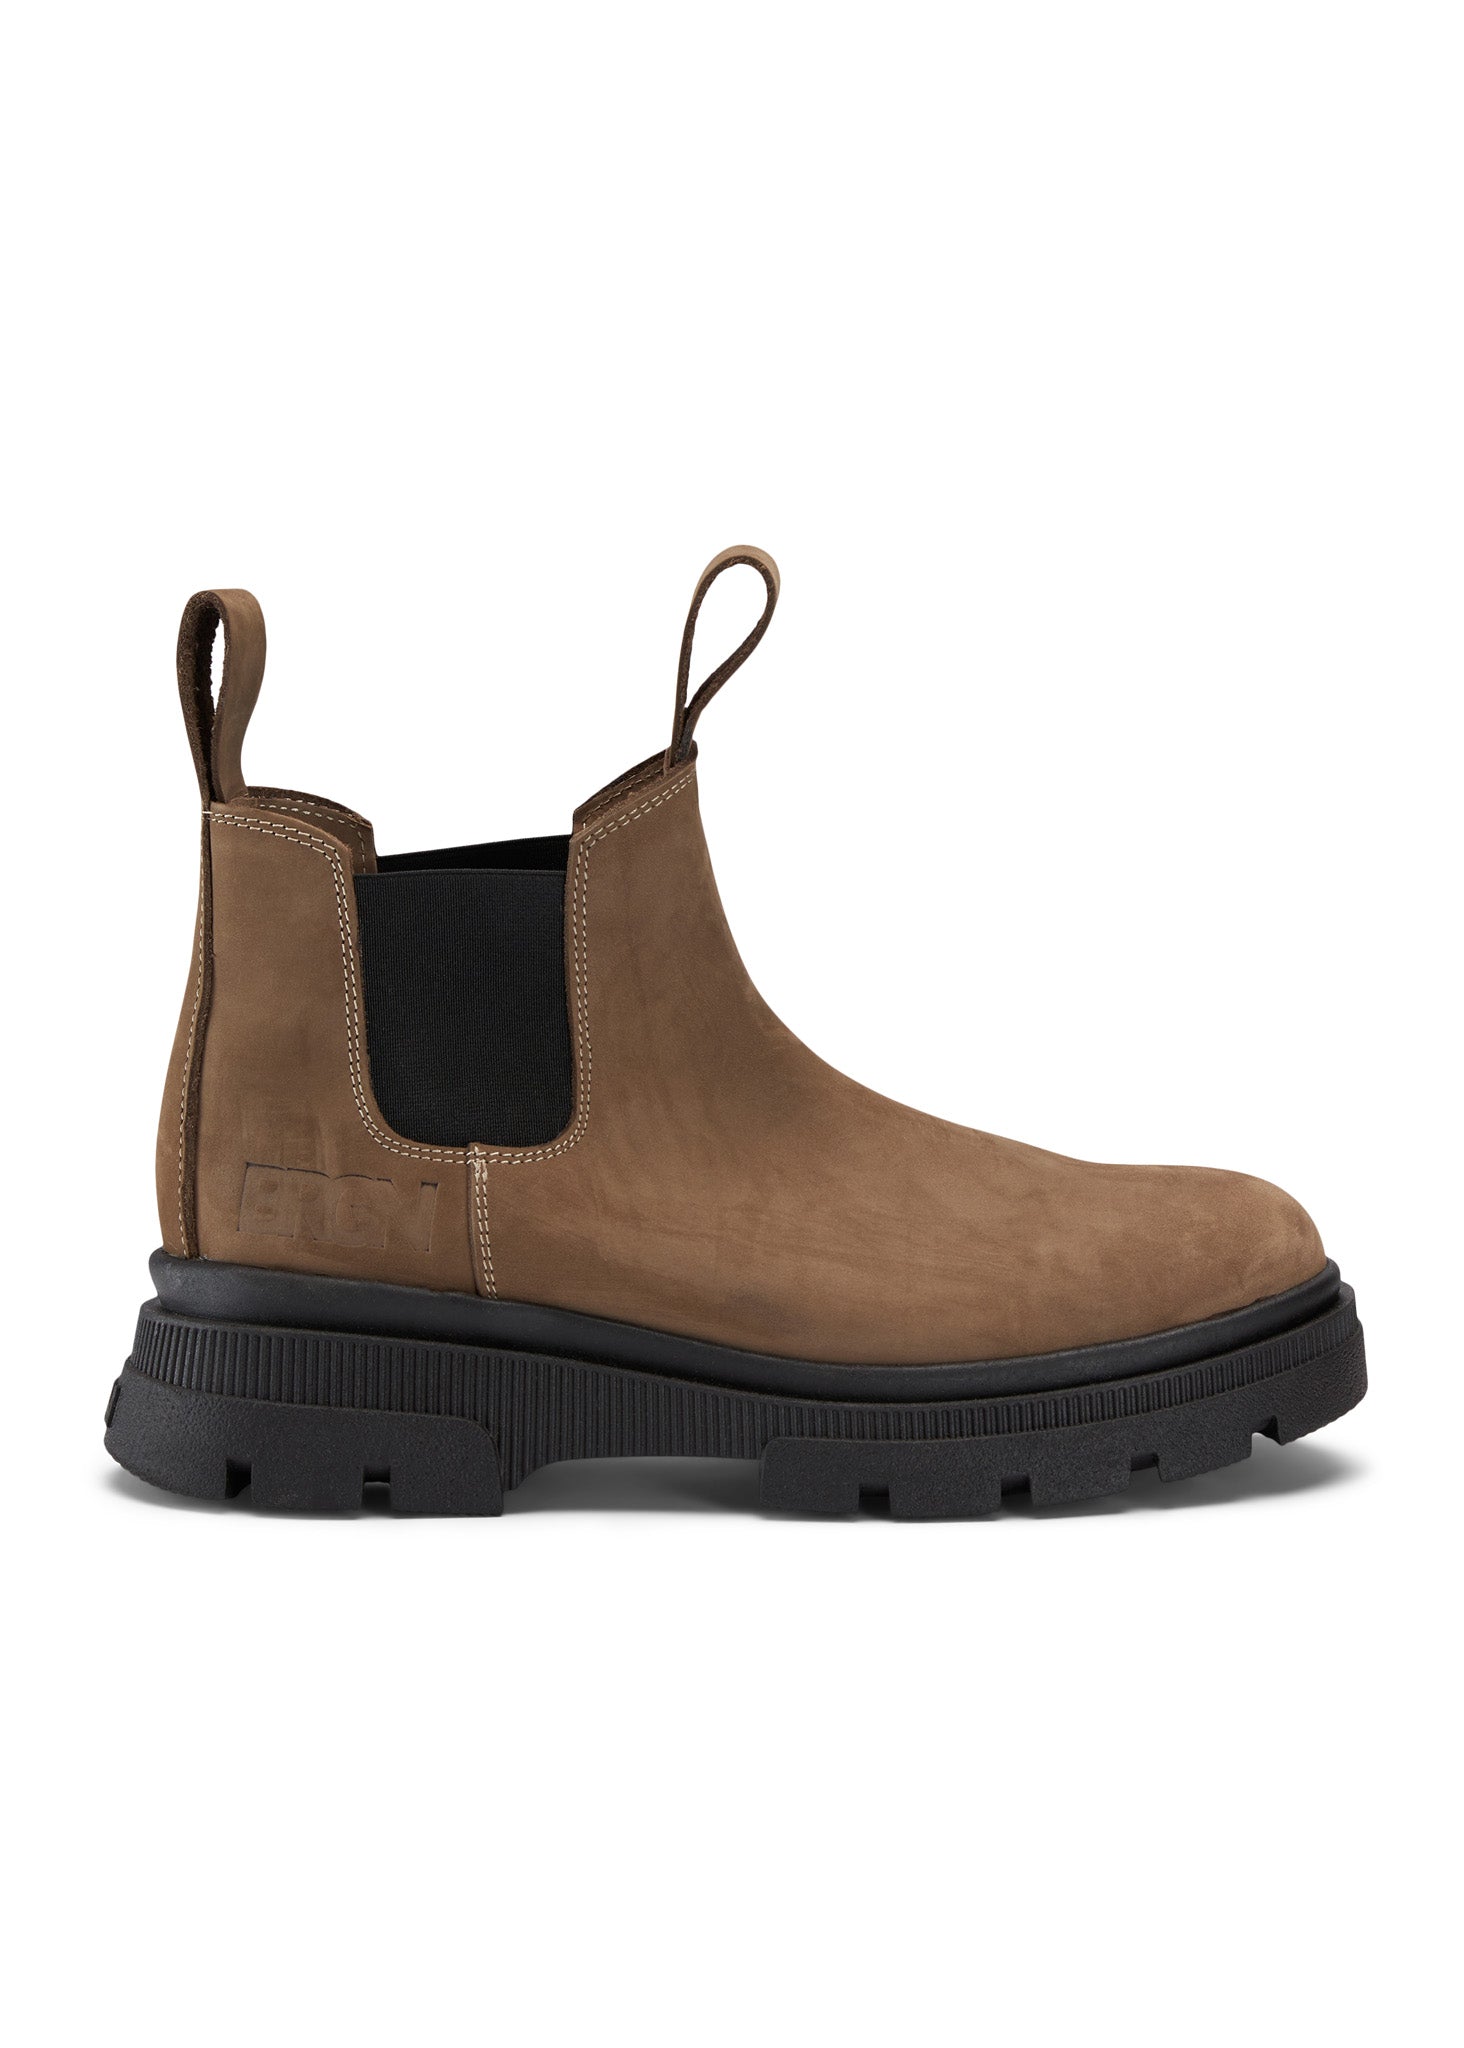 BRGN Low Chelsea Boot Shoes 145 Camel